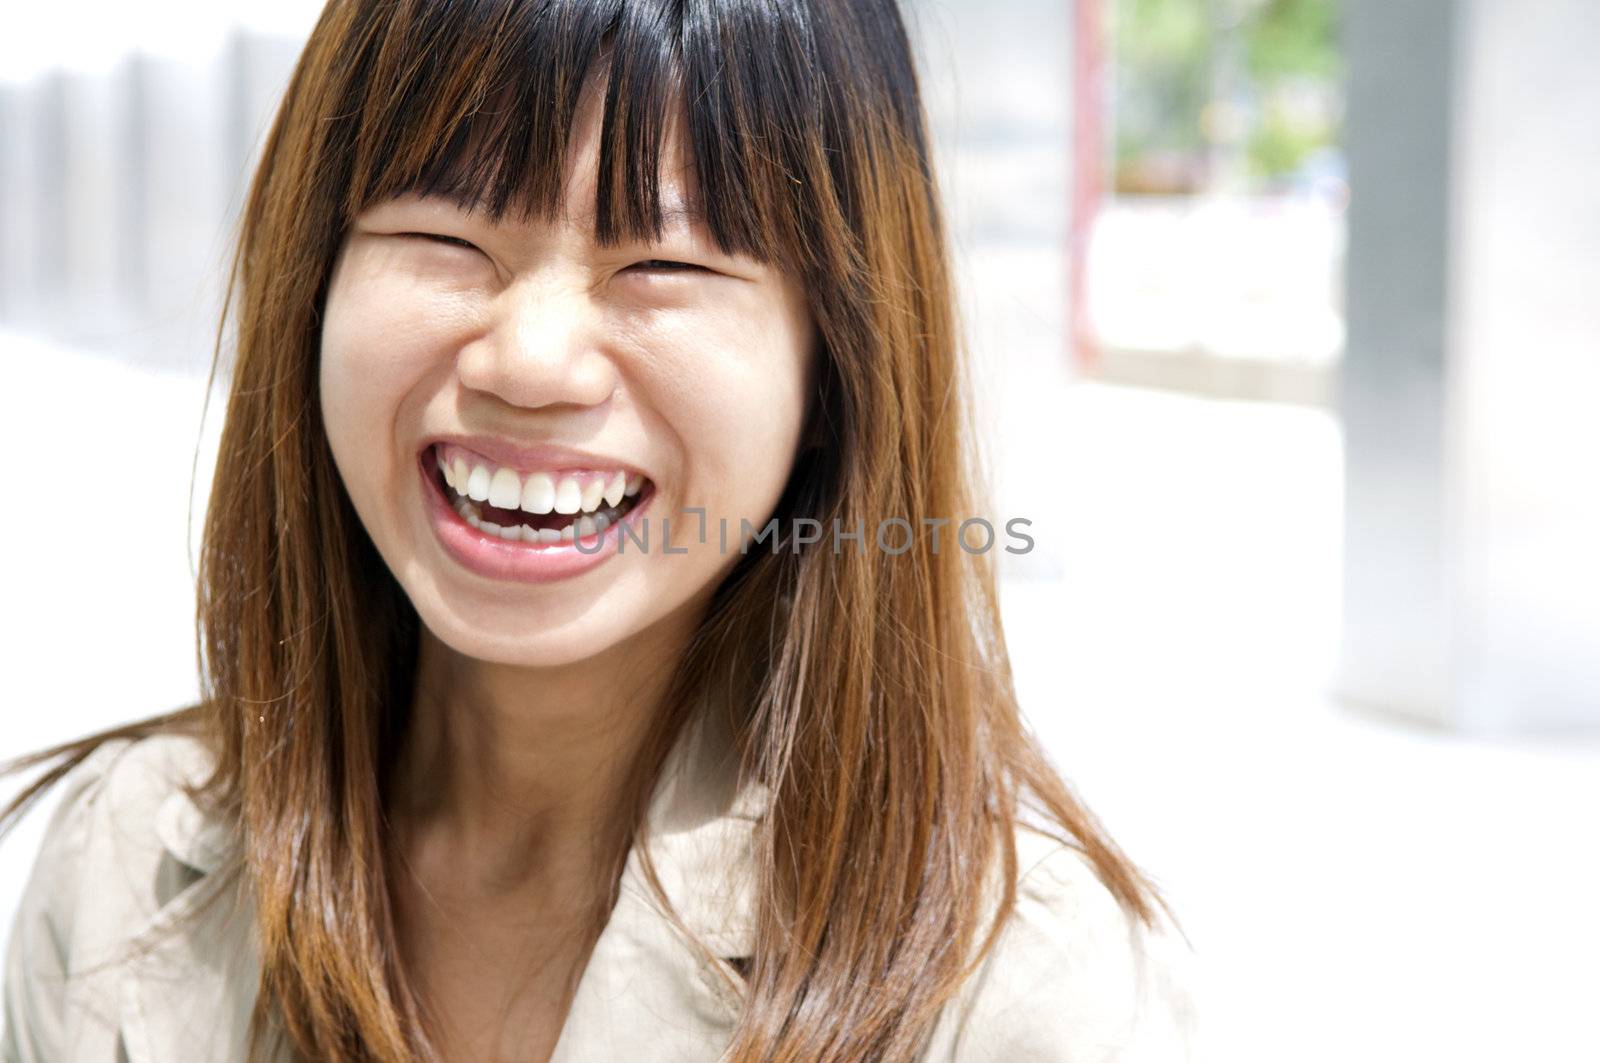 Asian female with her cheerful smile, outside modern building.